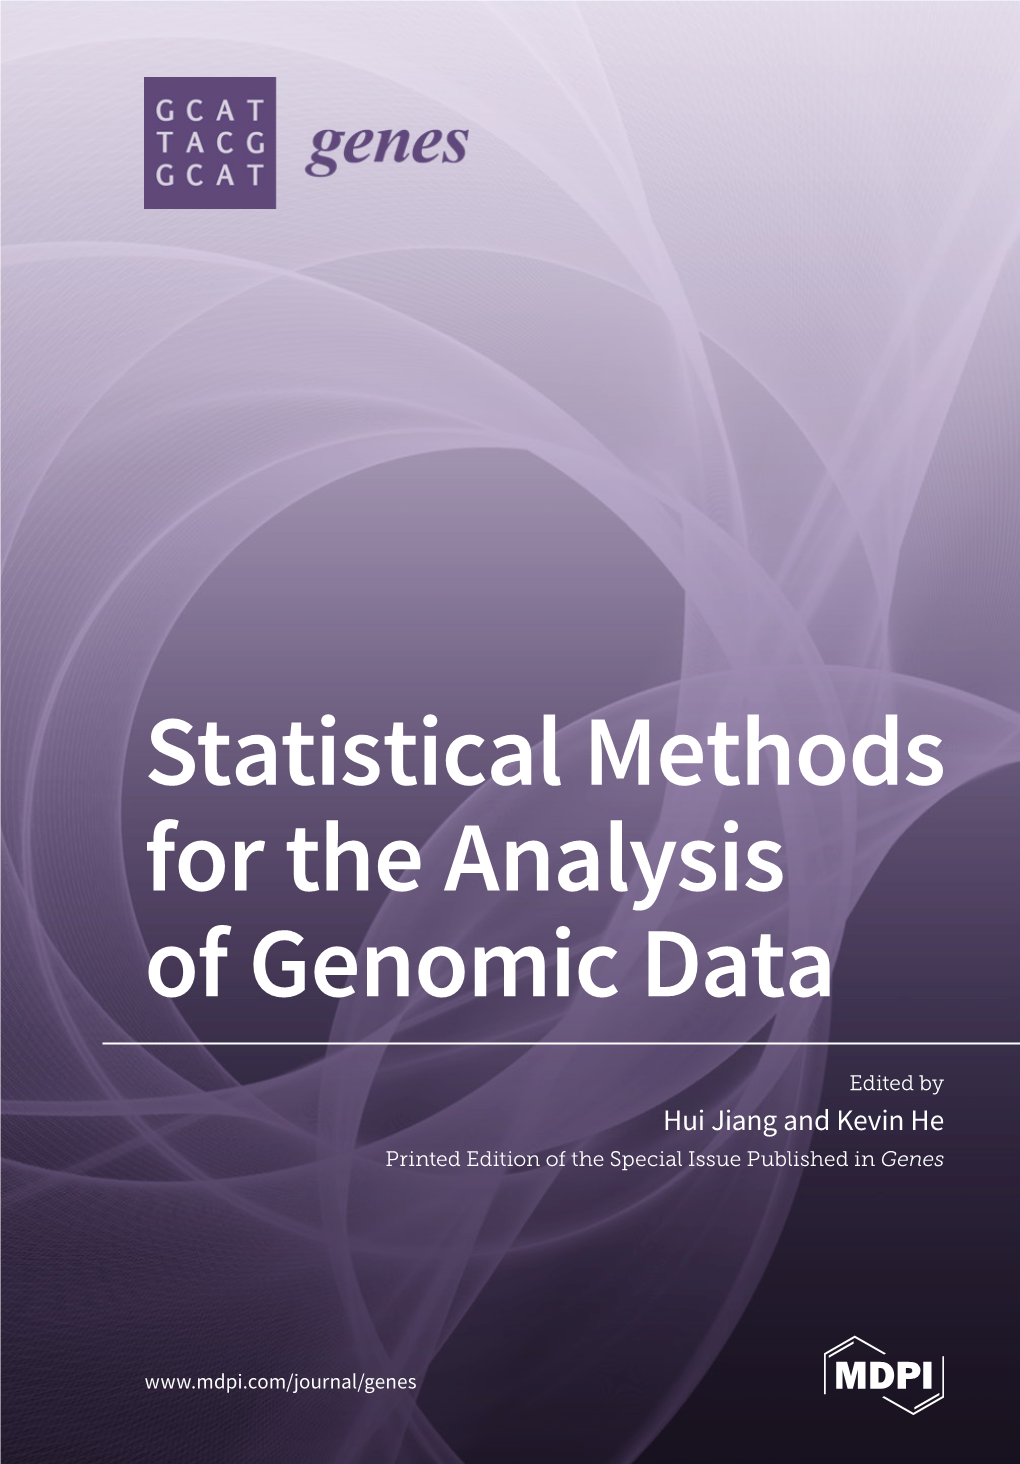 Statistical Methods for the Analysis of Genomic Data